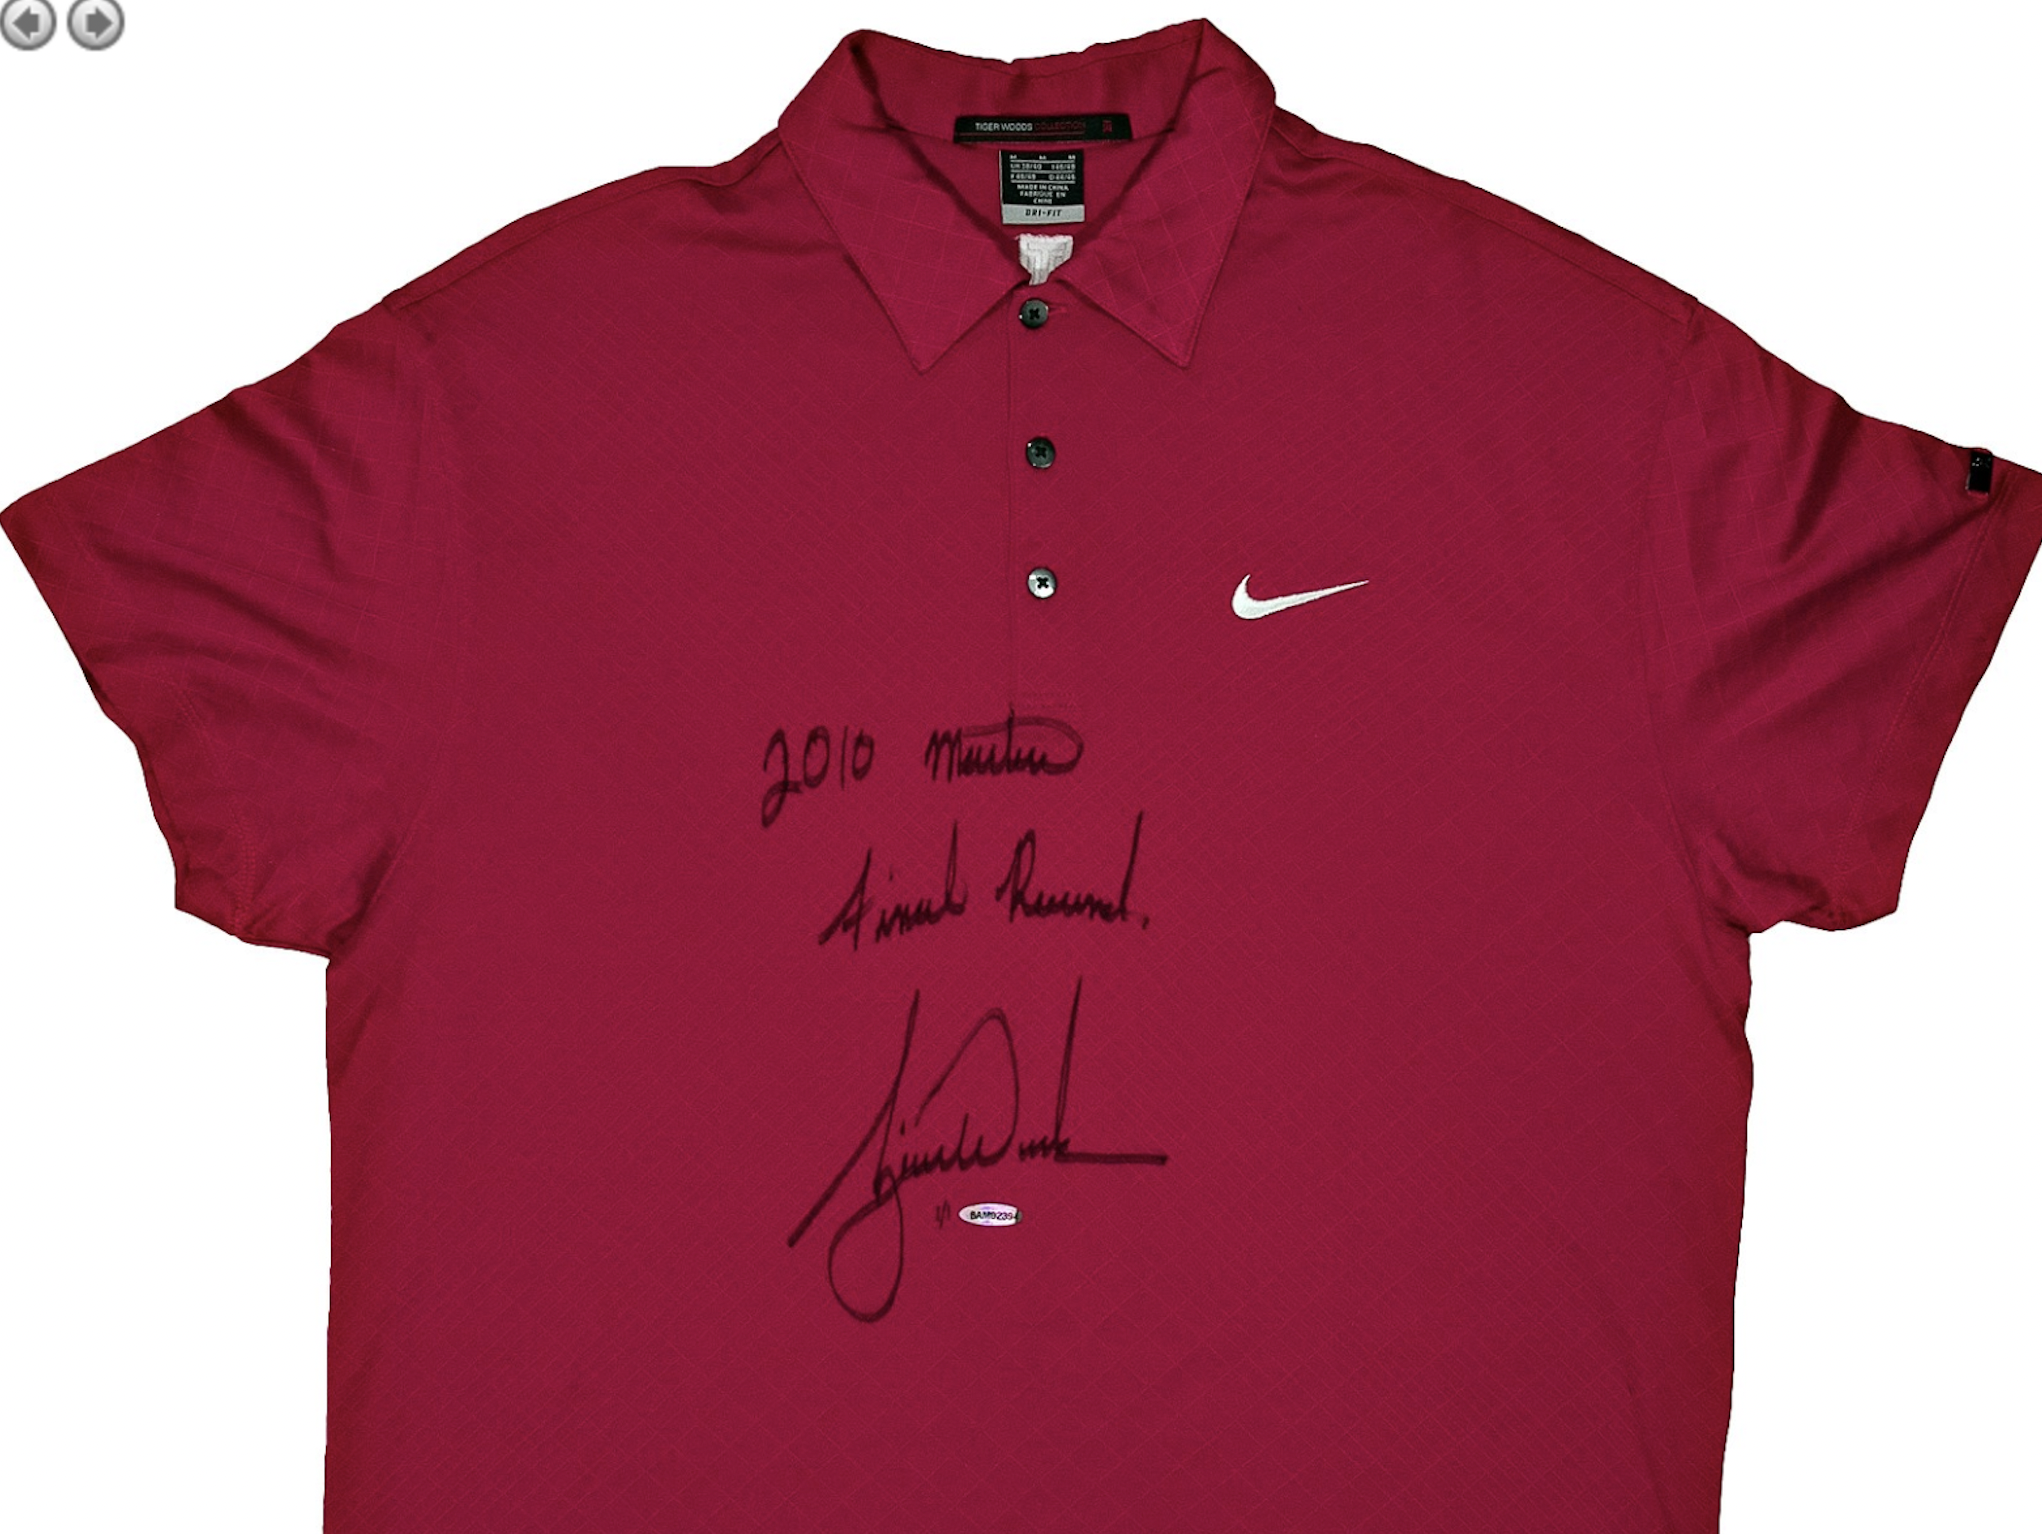 Tiger Woods’ Sunday Red Shirt From 2010 Masters Fetches Six Figures at Auction